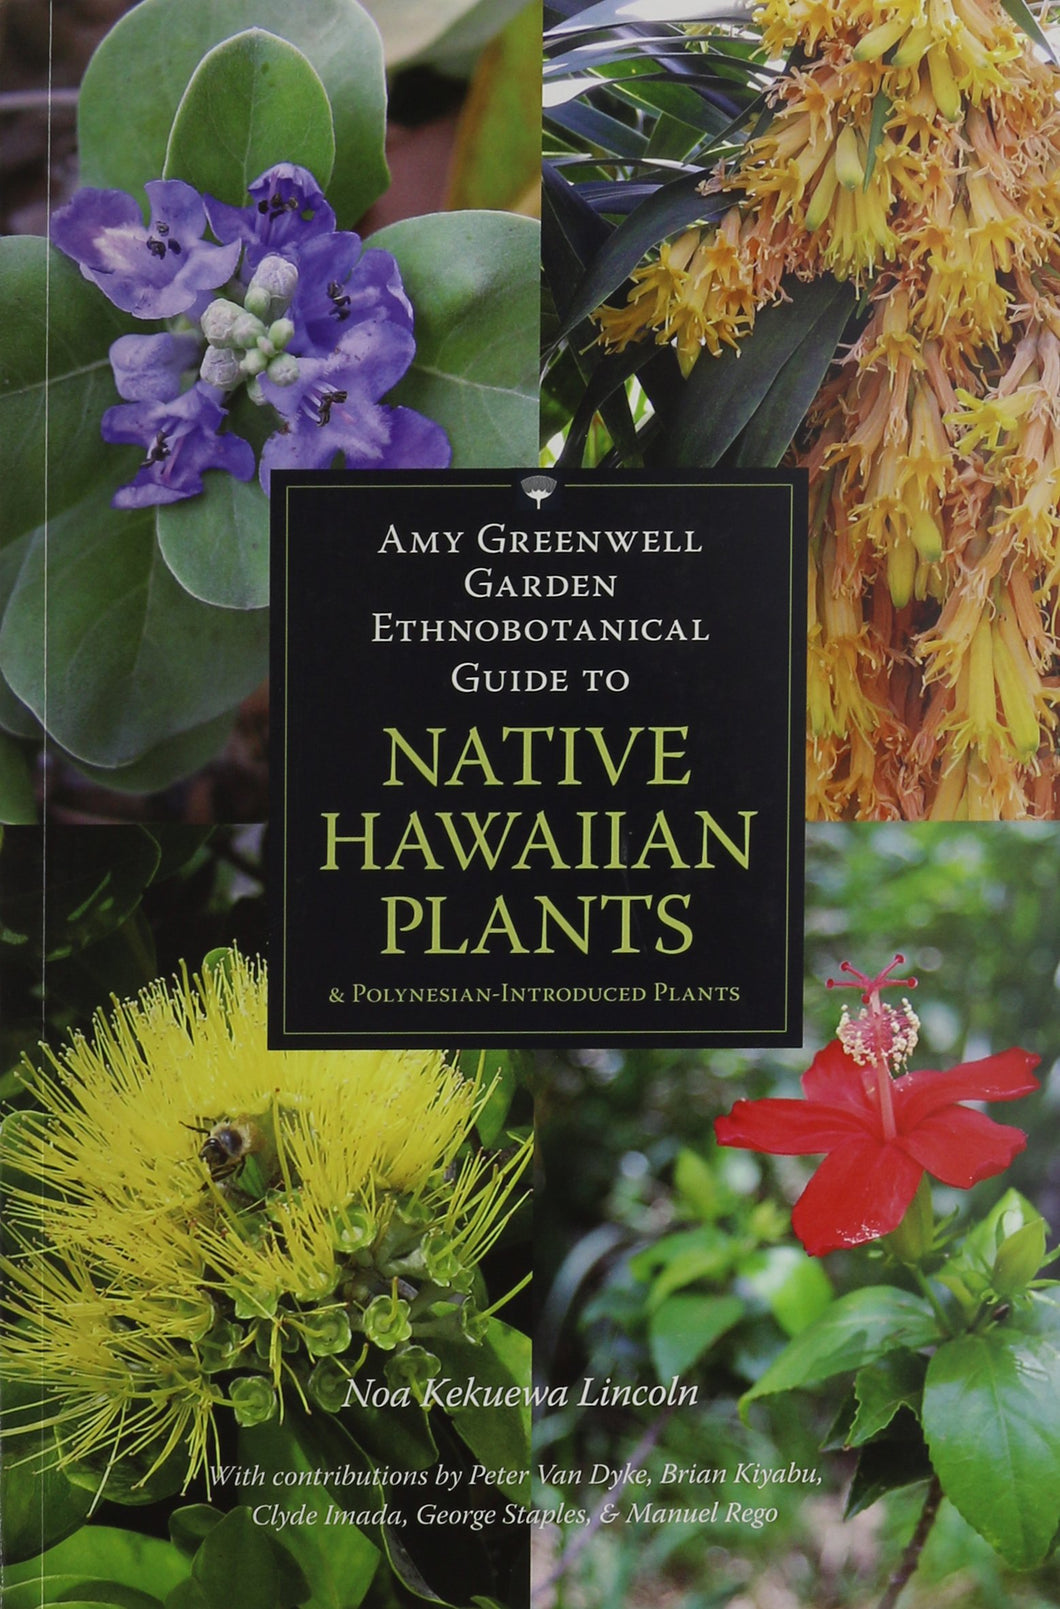 Amy Greenwell Garden Ethnobotanical Guide to Native Hawaiian Plants and Polynesian-Introduced Plants by Noa Lincoln